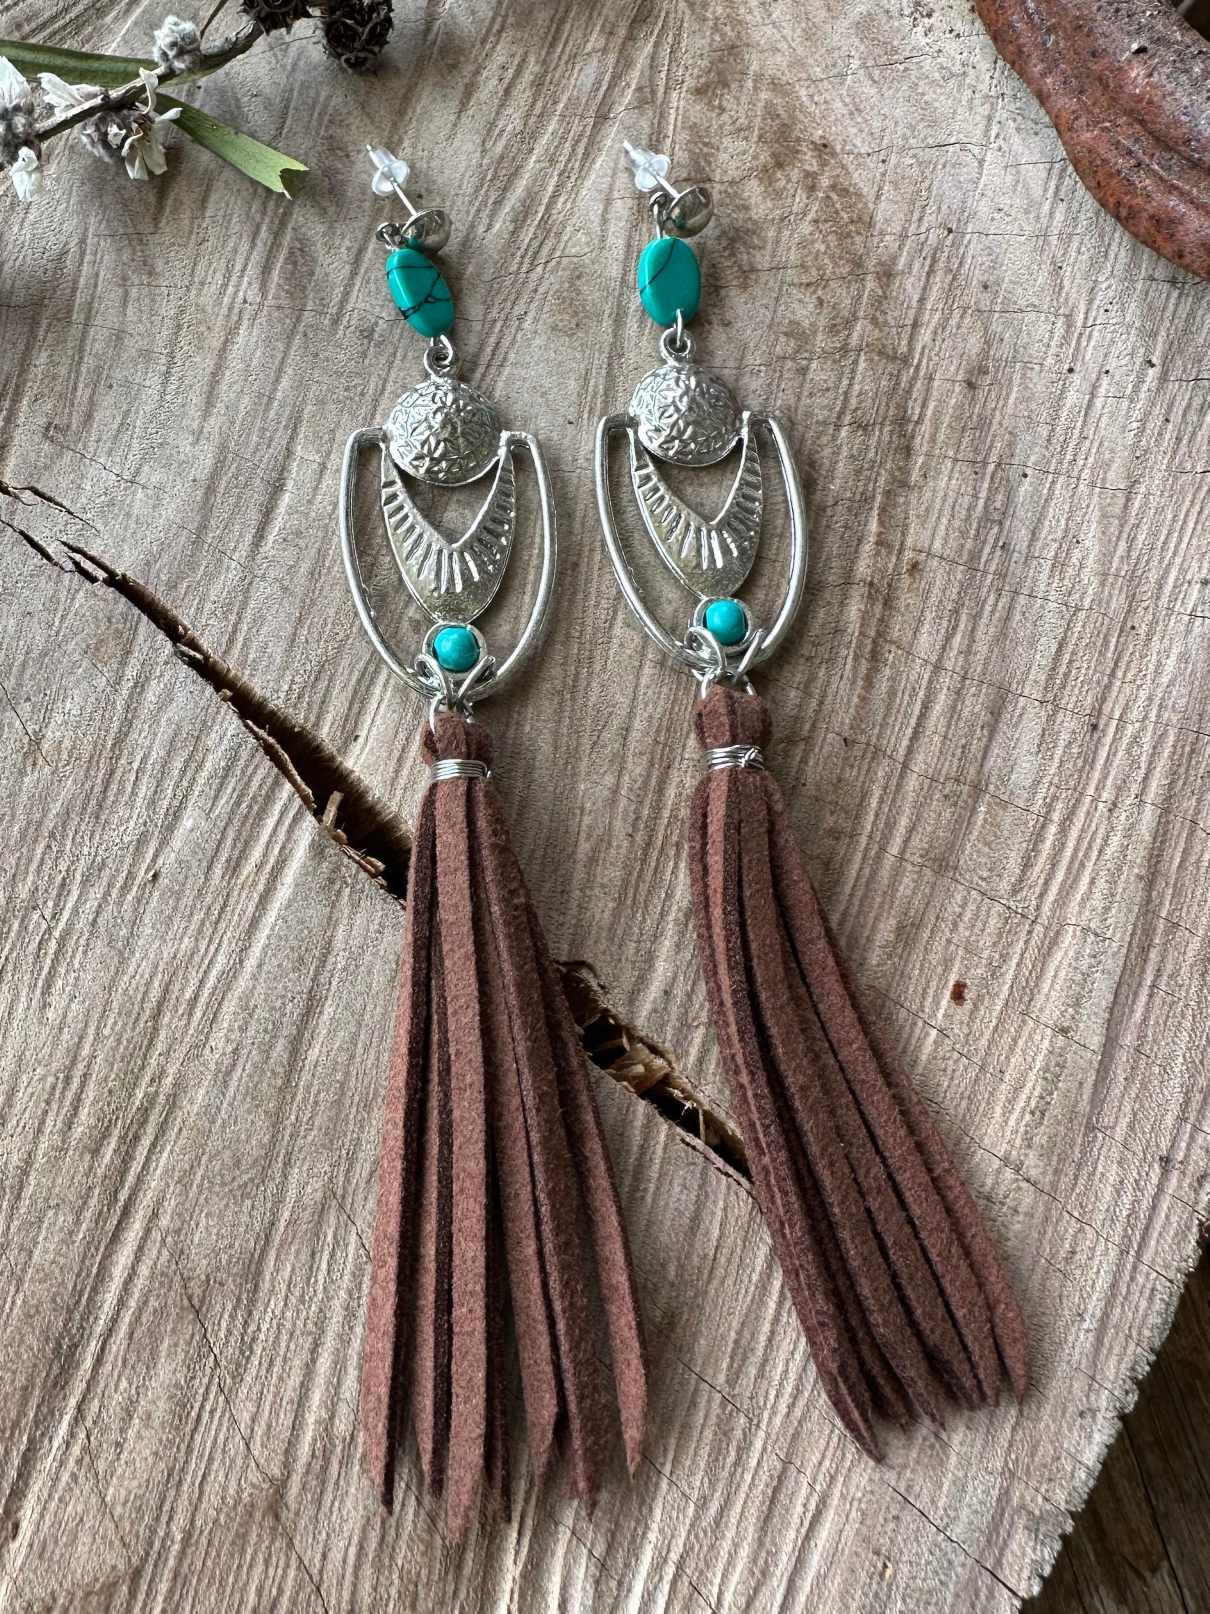 Earings - Western Inspired Tassle earing with Faux Turquoise